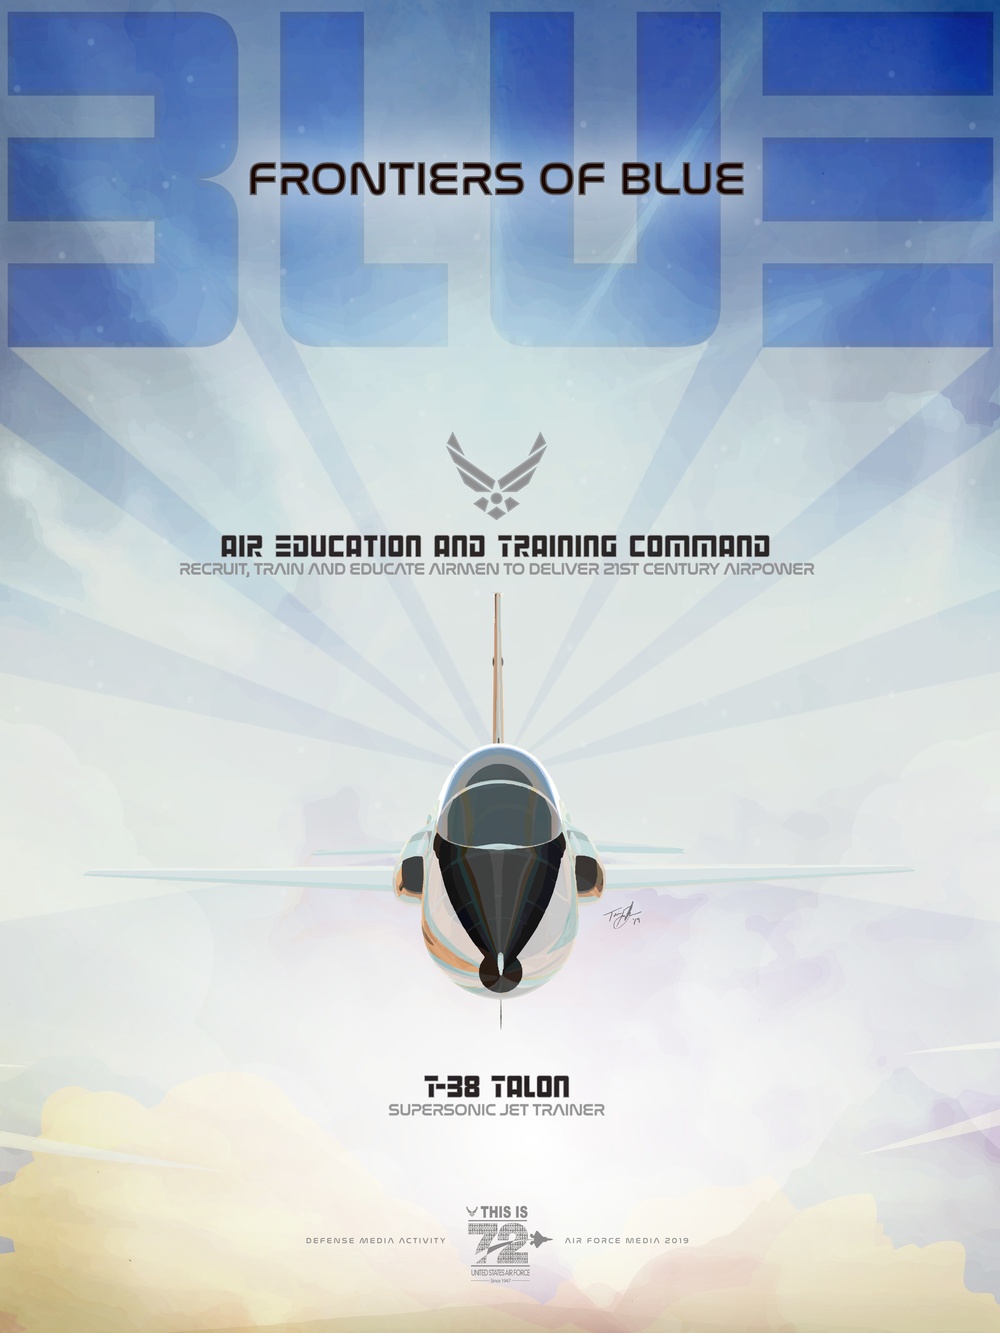 Frontiers of Blue - Air Education and Training Command